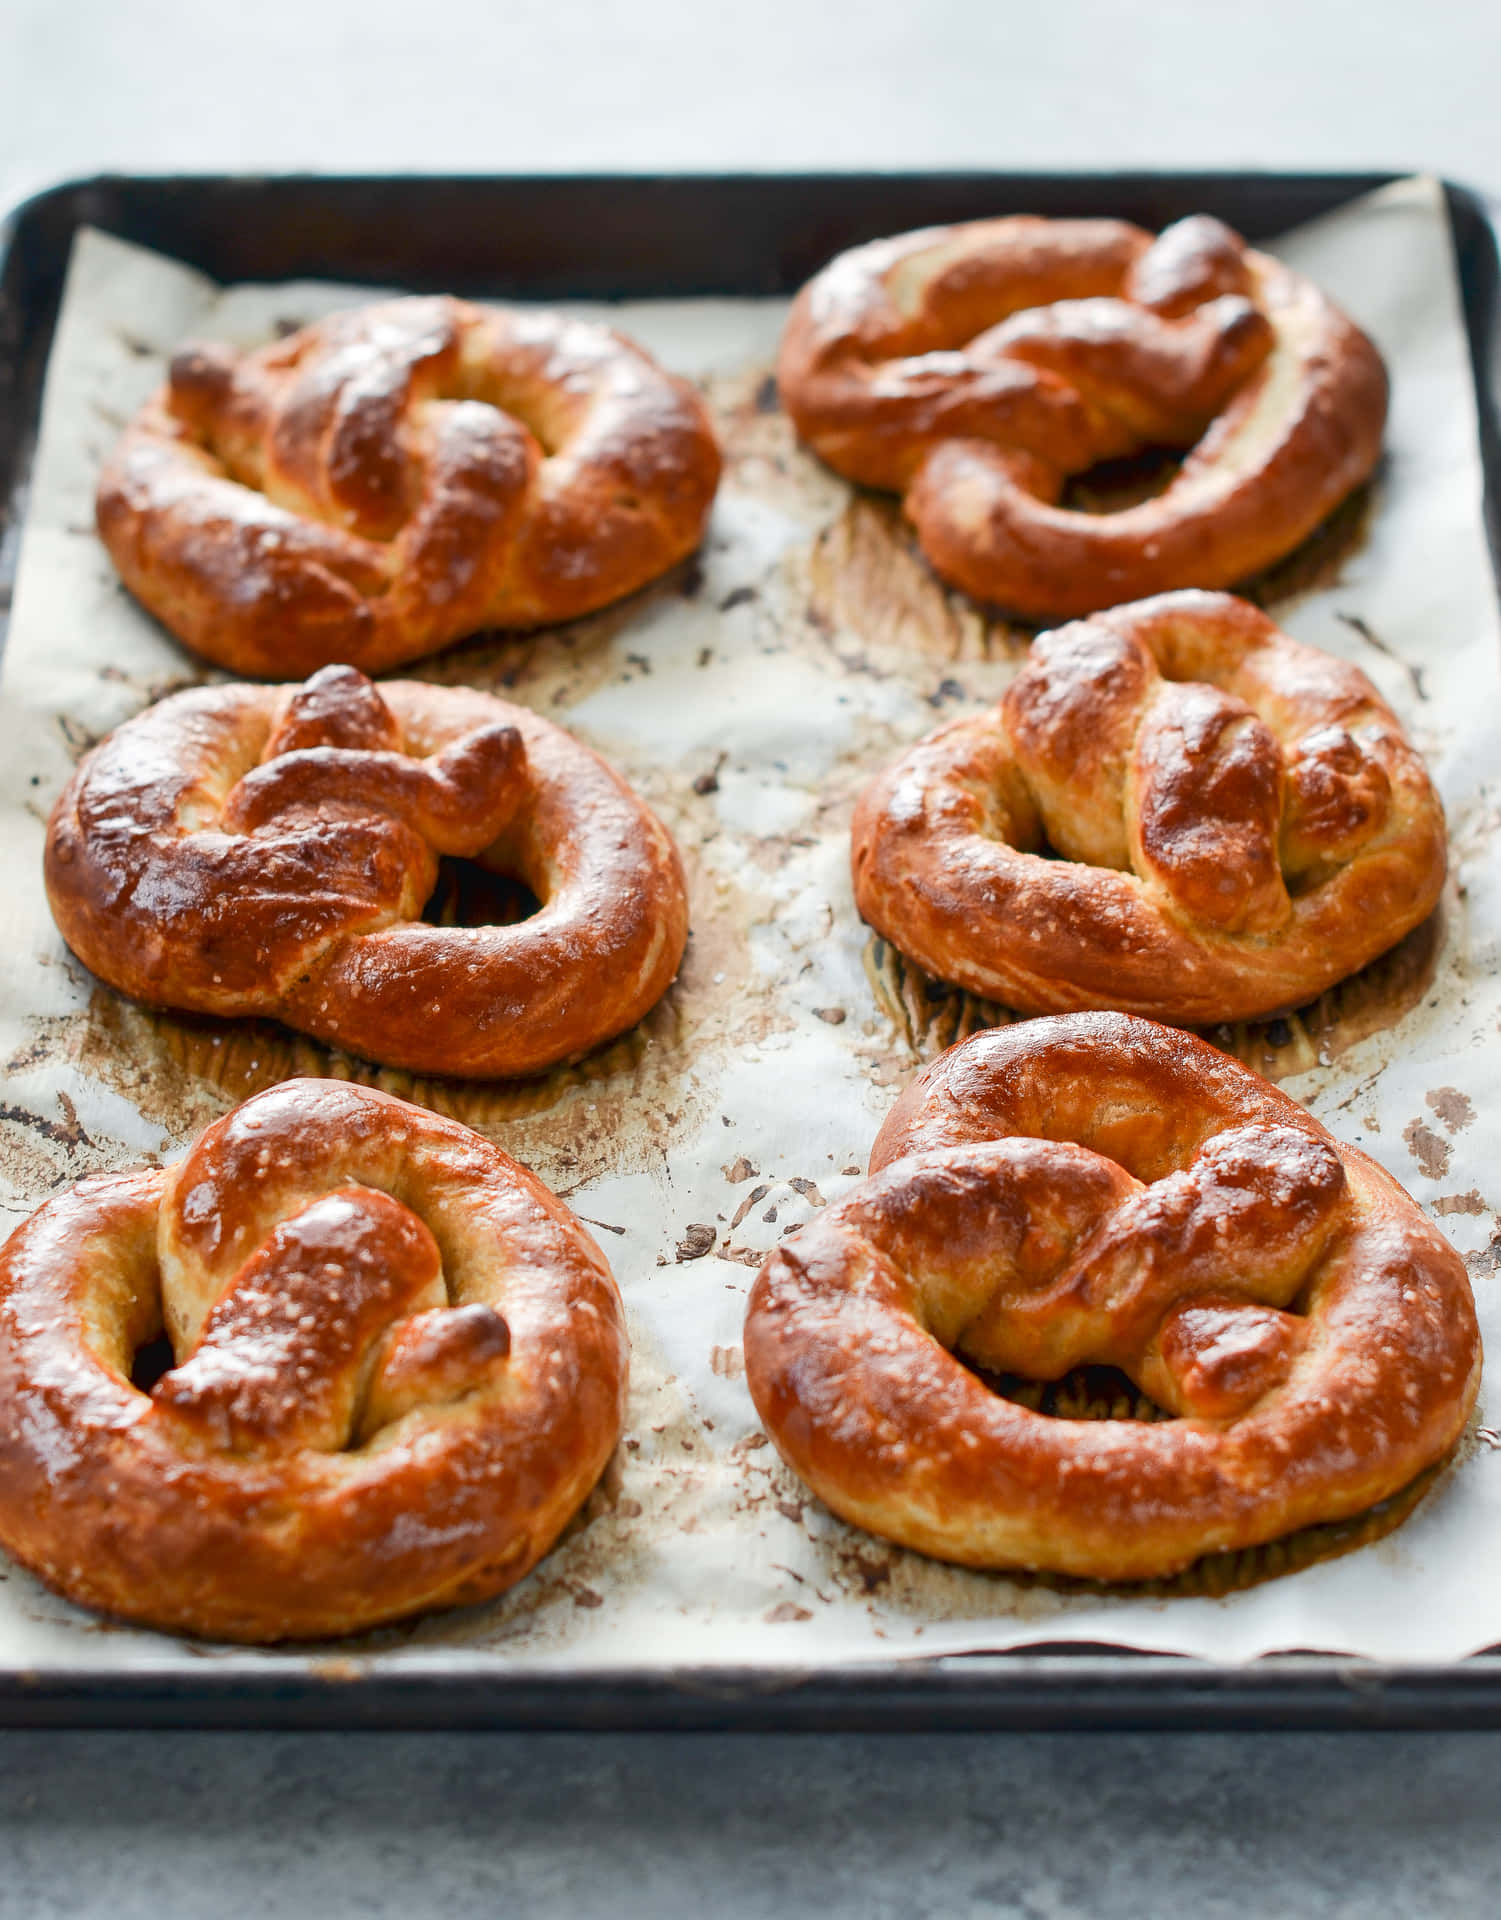 A Freshly Baked Pretzel, Waiting to be Delighted